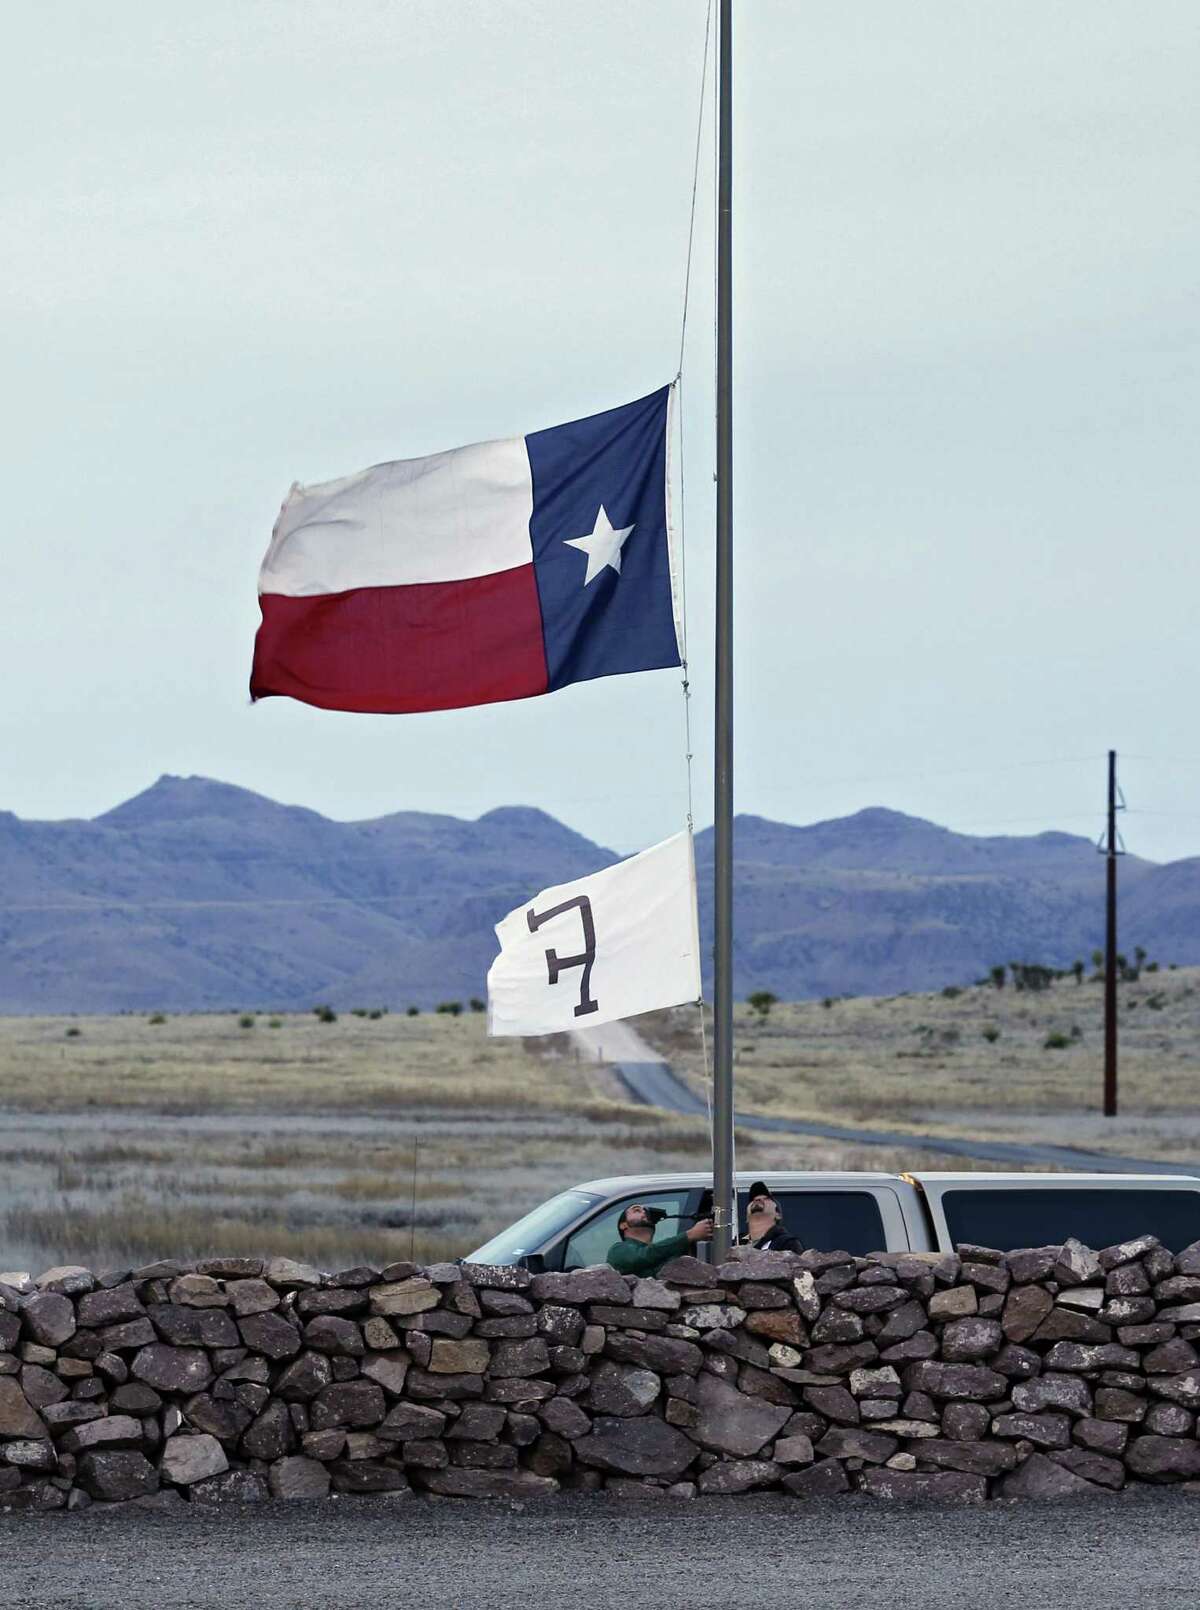 CIBOLO CREEK RANCH, TX - FEBRUARY 13, 2016 - Ranch staff lower the Texas and ranch flag to half staff at Cibolo Creek Ranch south of Marfa, Texas where Supreme Court Justice Antonin Scalia died Saturday. (Photo by Erich Schlegel)